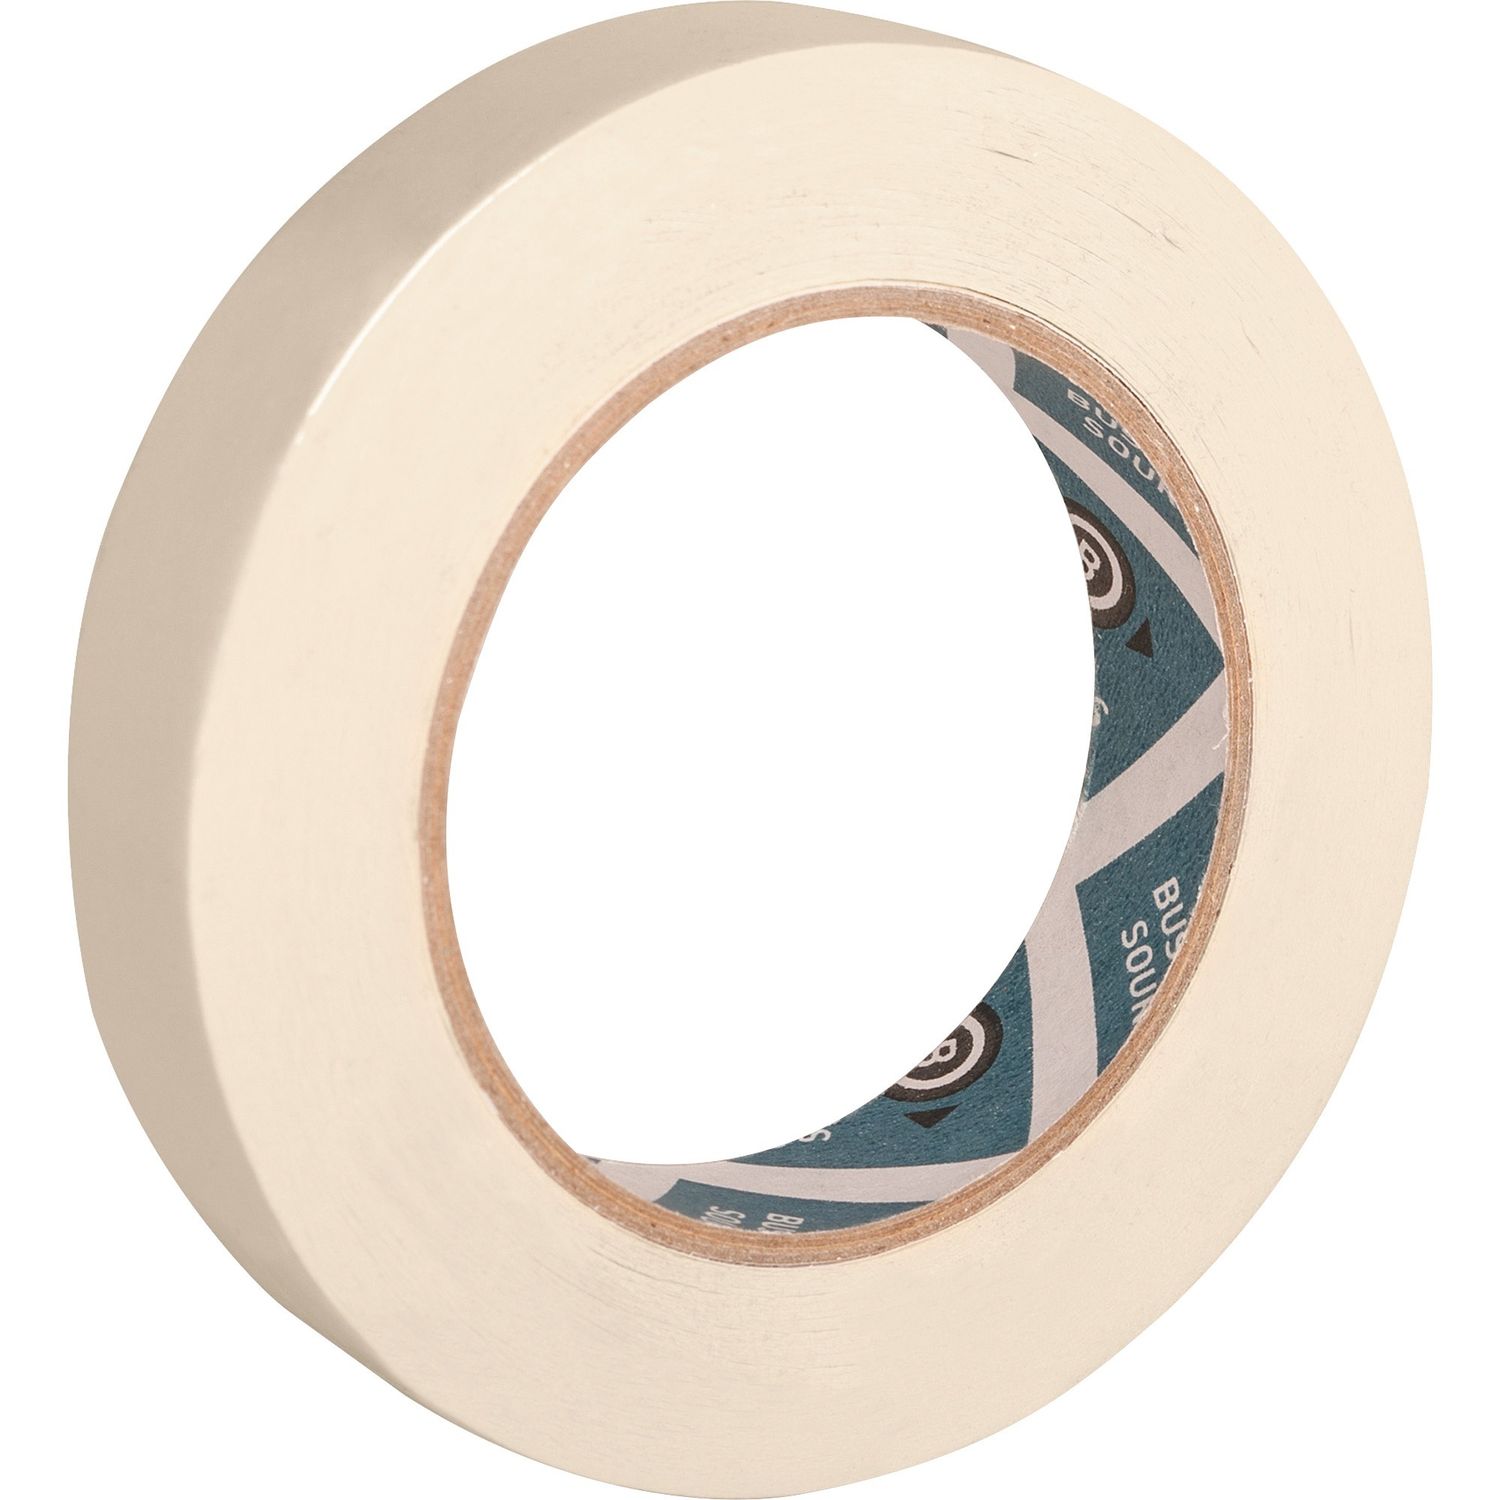 Utility-purpose Masking Tape 60 yd Length x 0.75" Width, 3" Core, Crepe Paper Backing, 1 / Roll, Tan